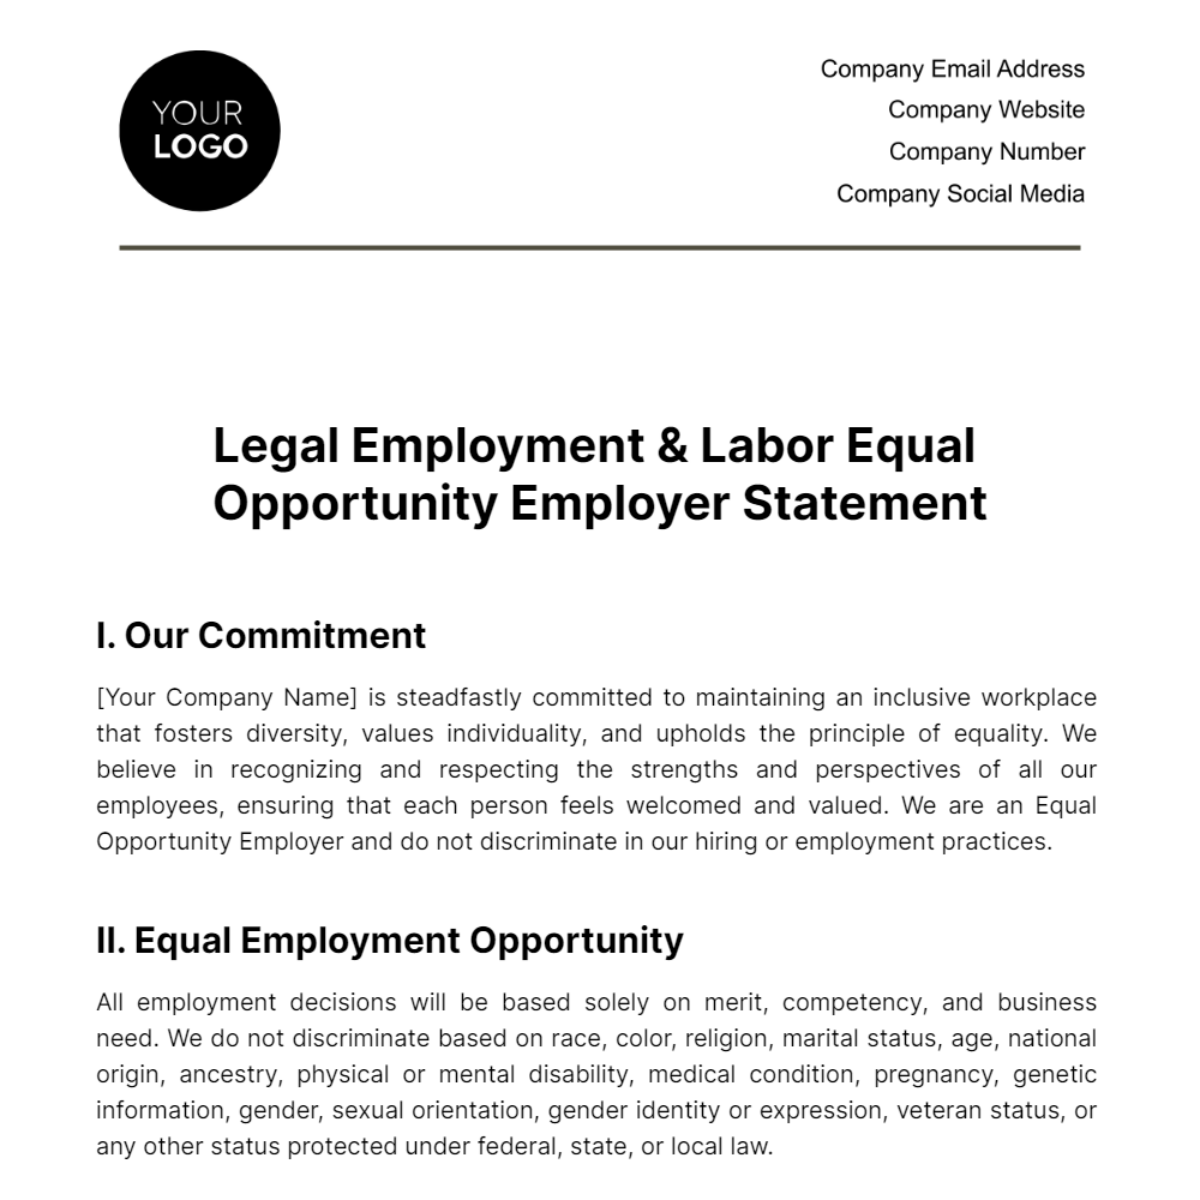 Free Legal Employment & Labor Equal Opportunity Employer Statement Template